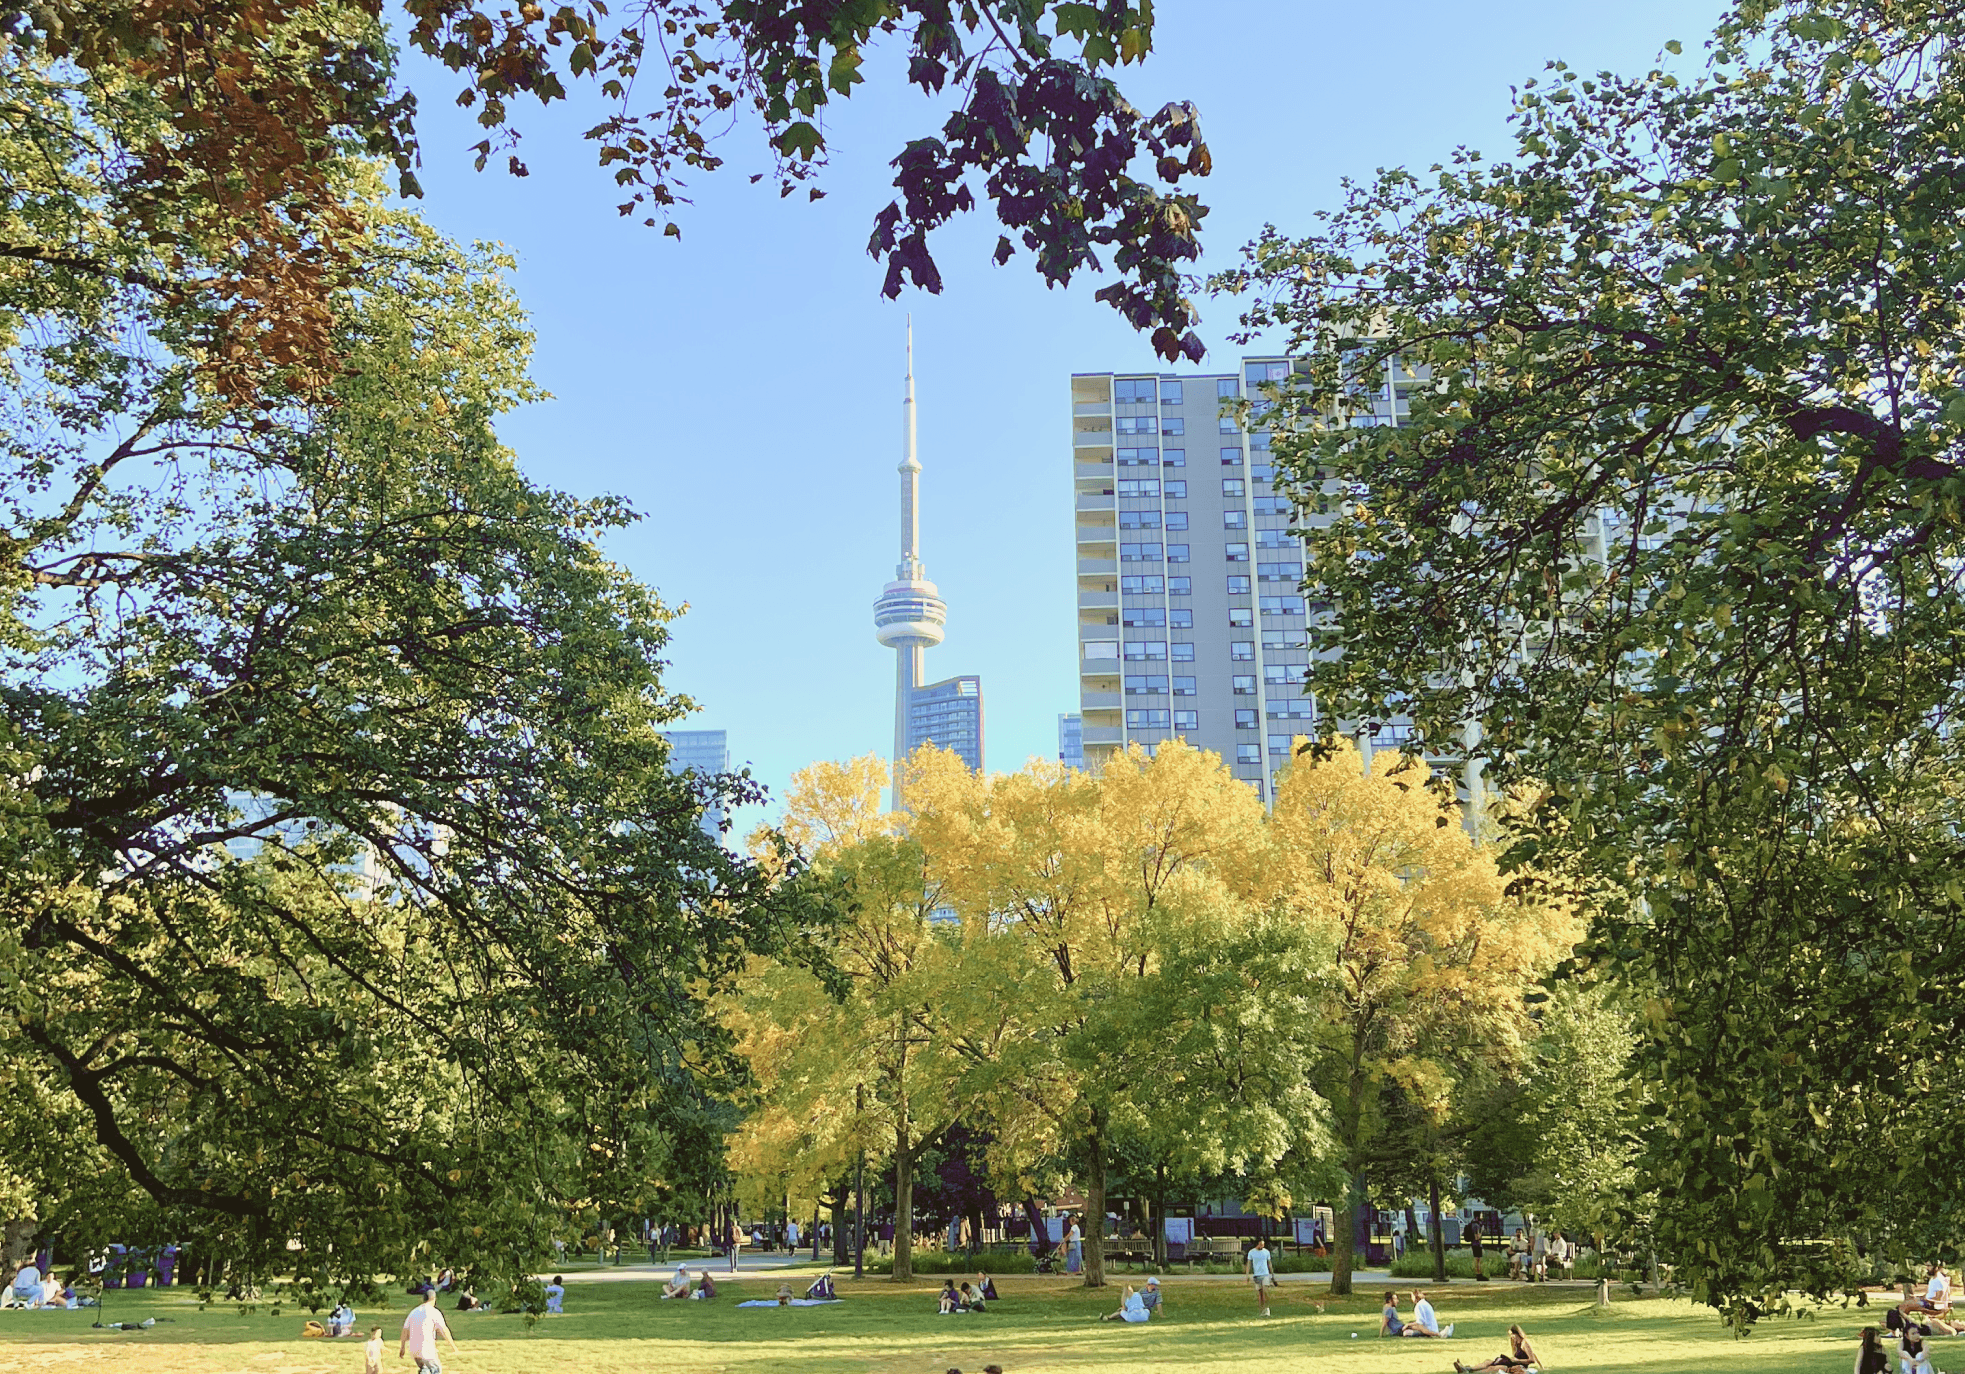 A photo of the CN tower from a park in Toronto.